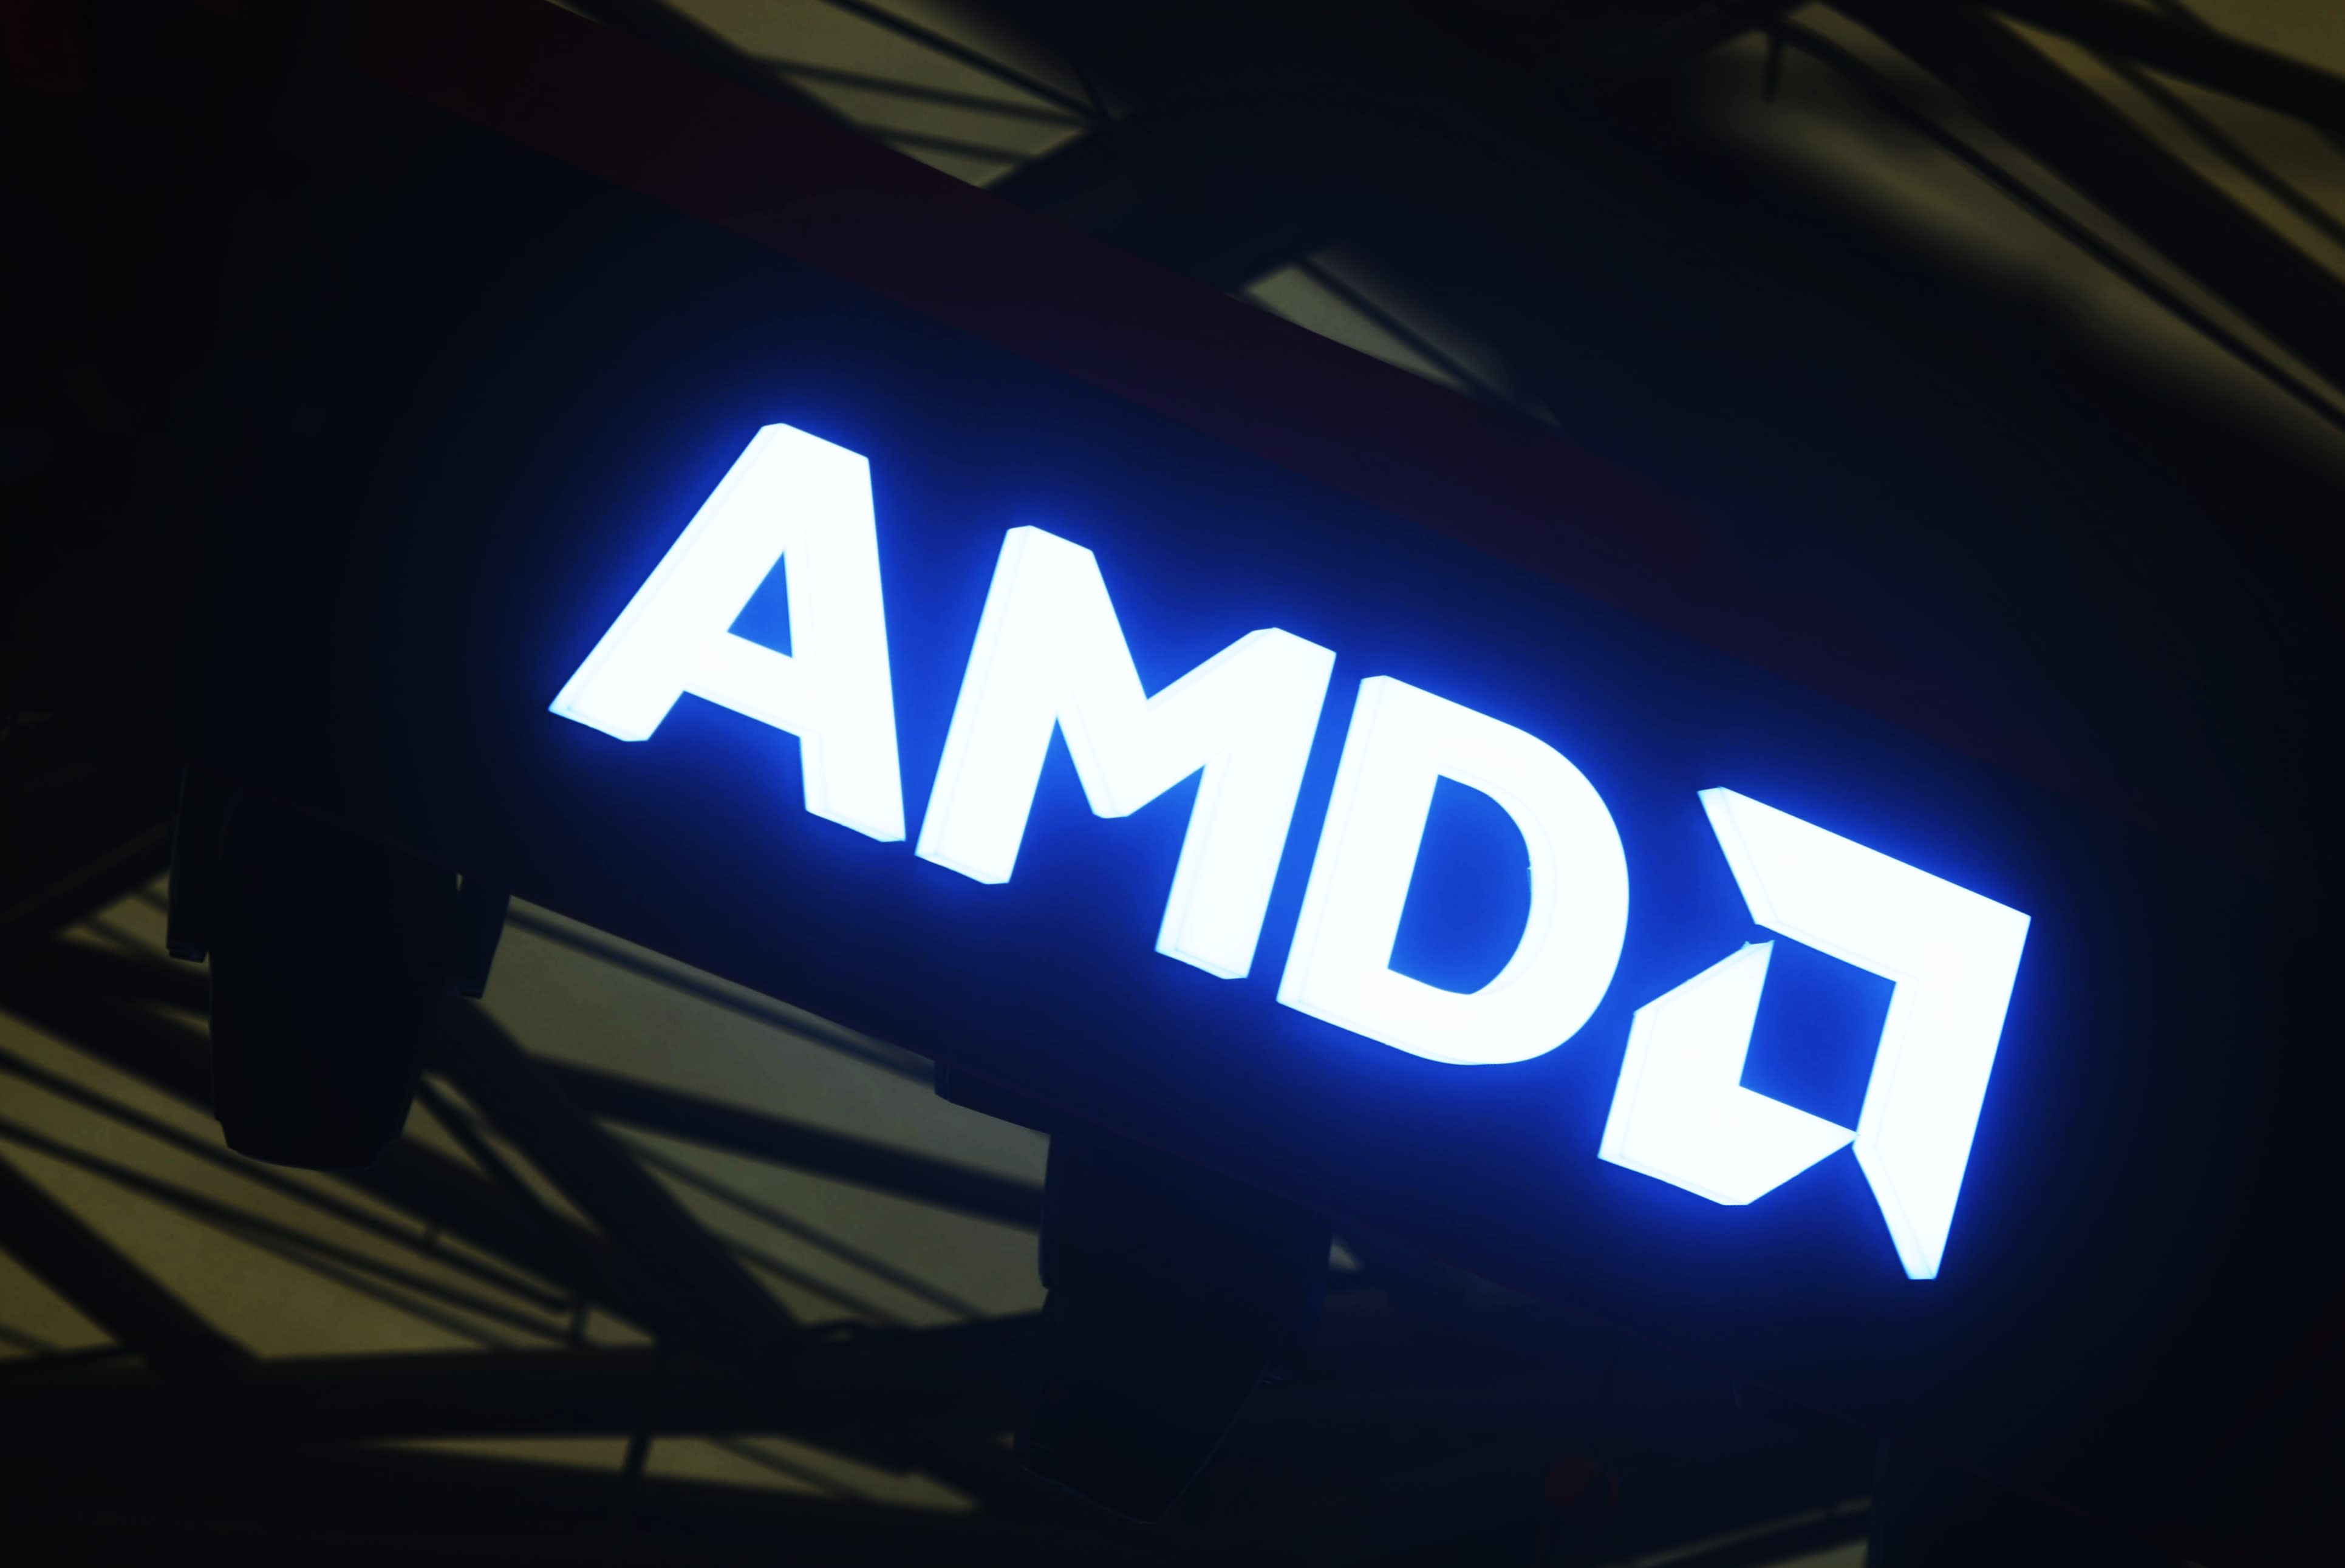 AMD is betting on AI-powered PCs as the technology race with Nvidia and Intel heats up